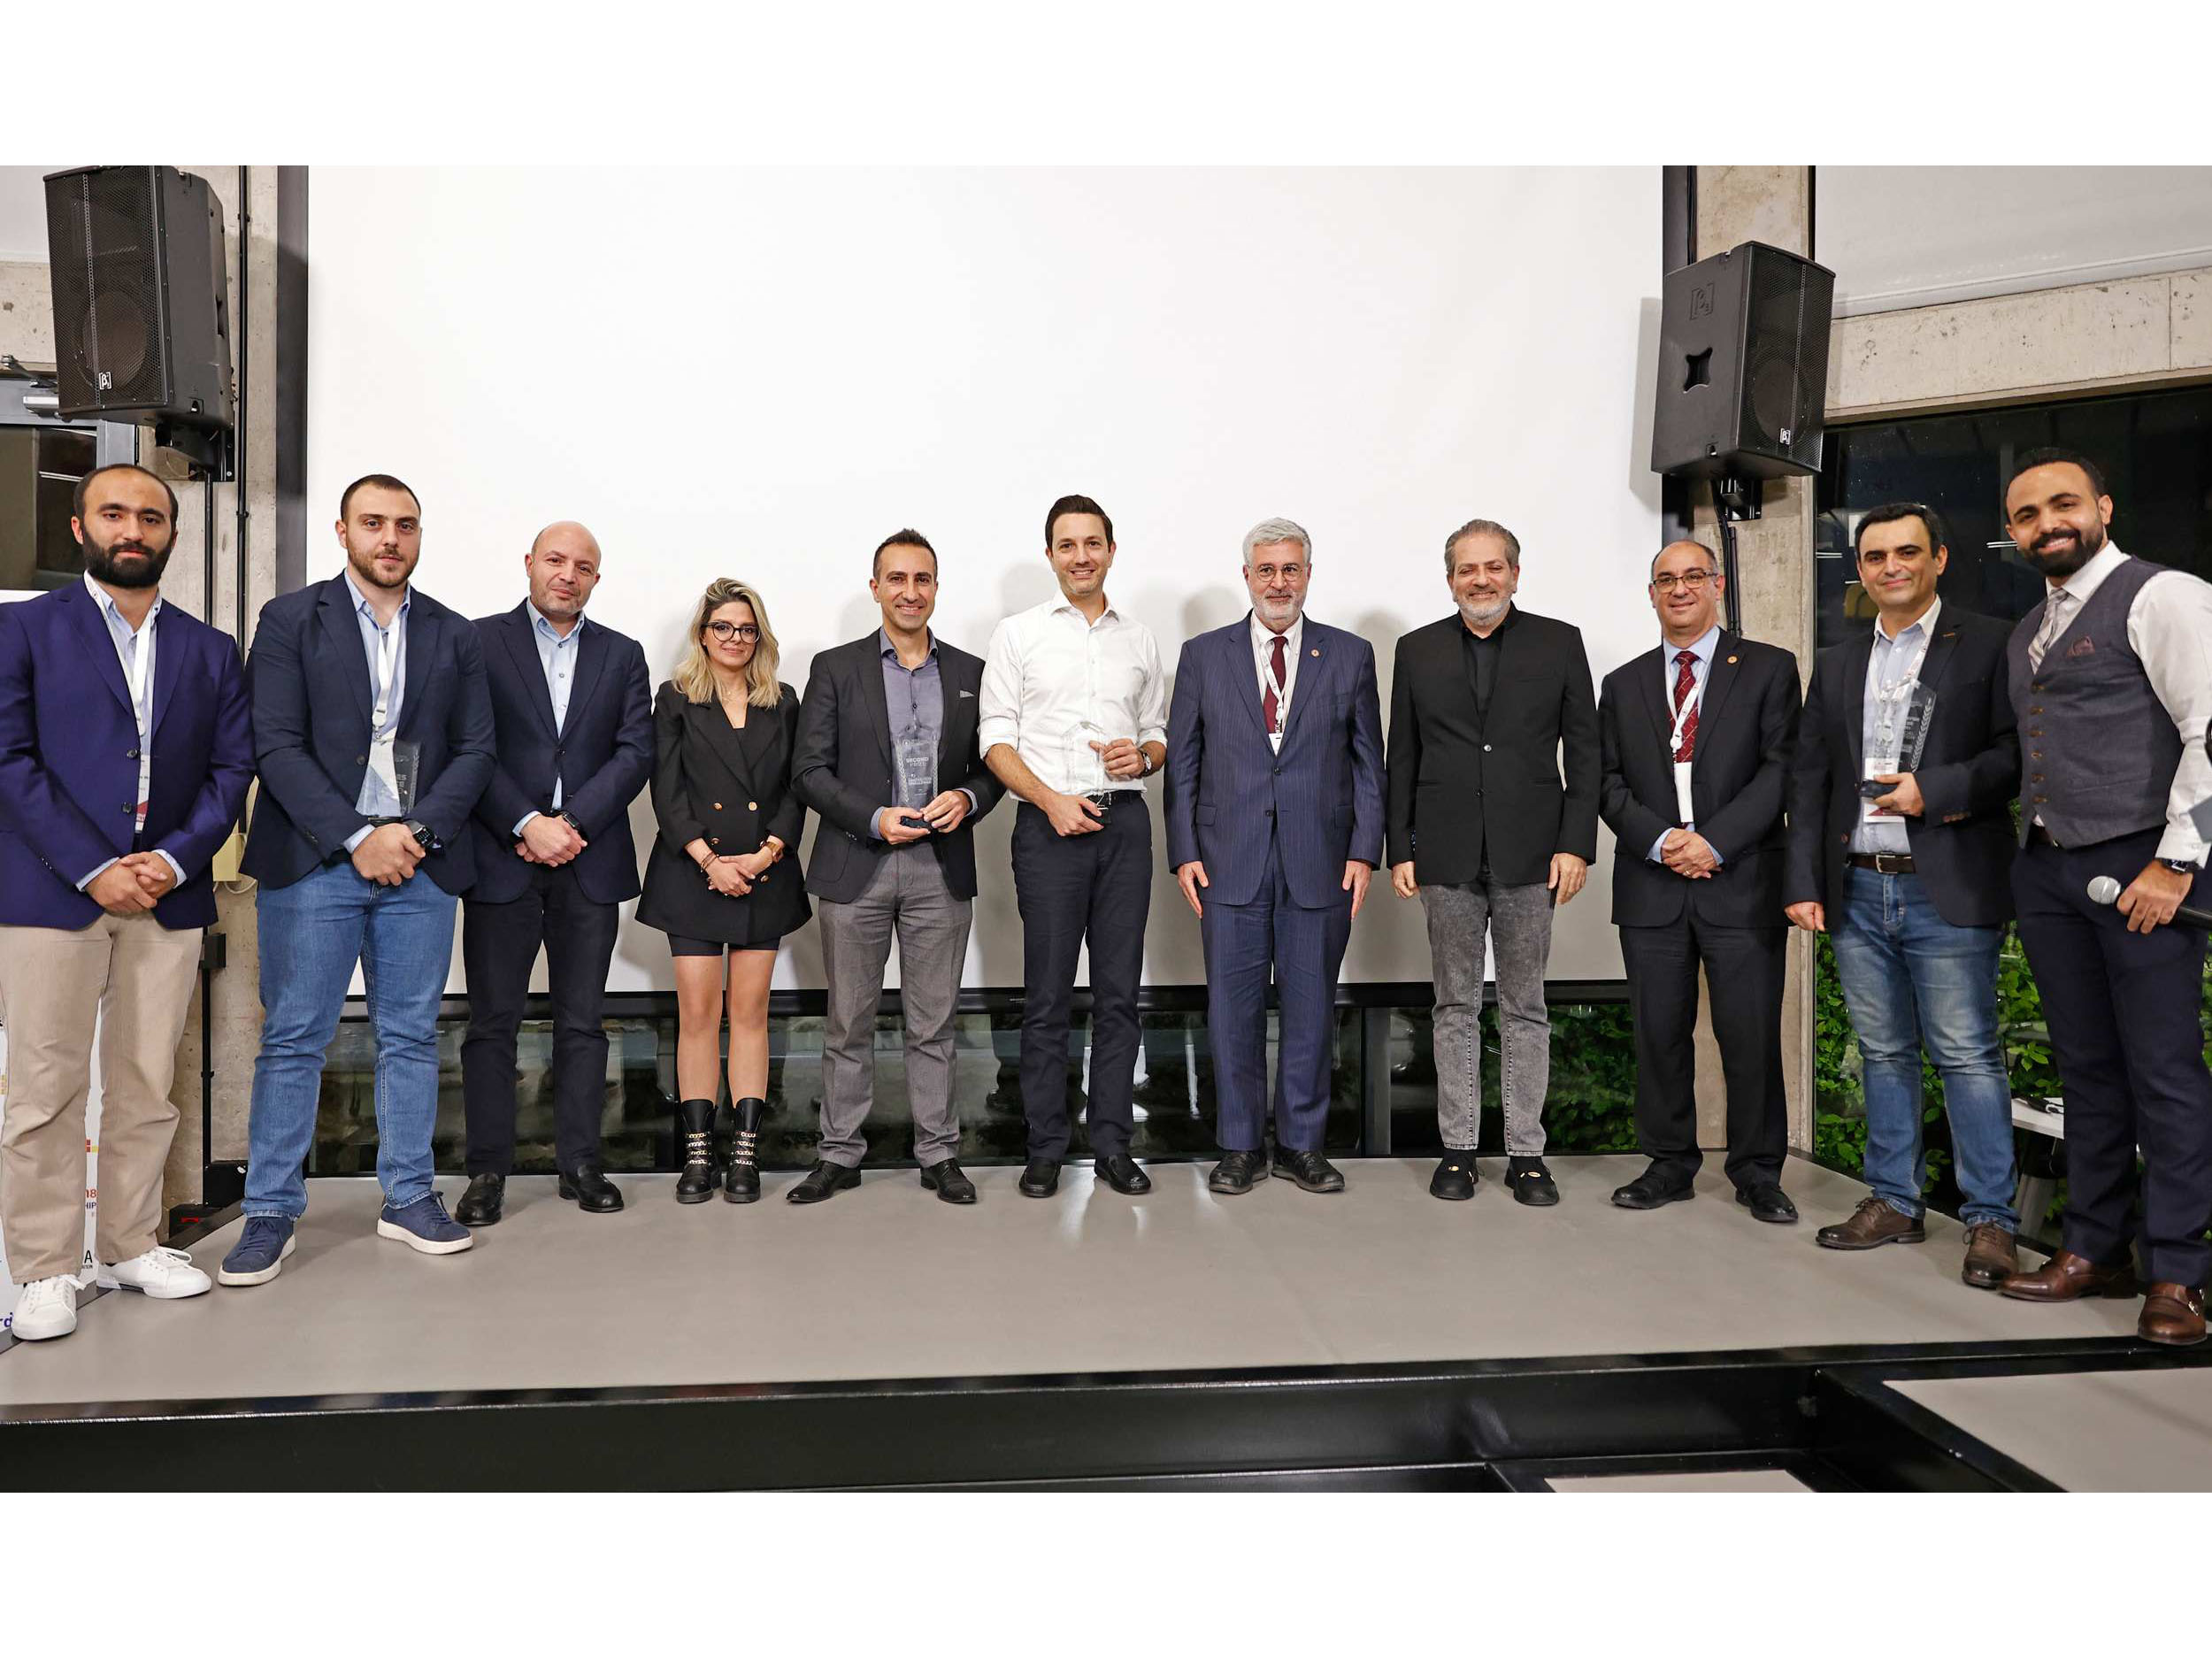 Startups win $55,000 at the AUB President’s Innovation Challenge